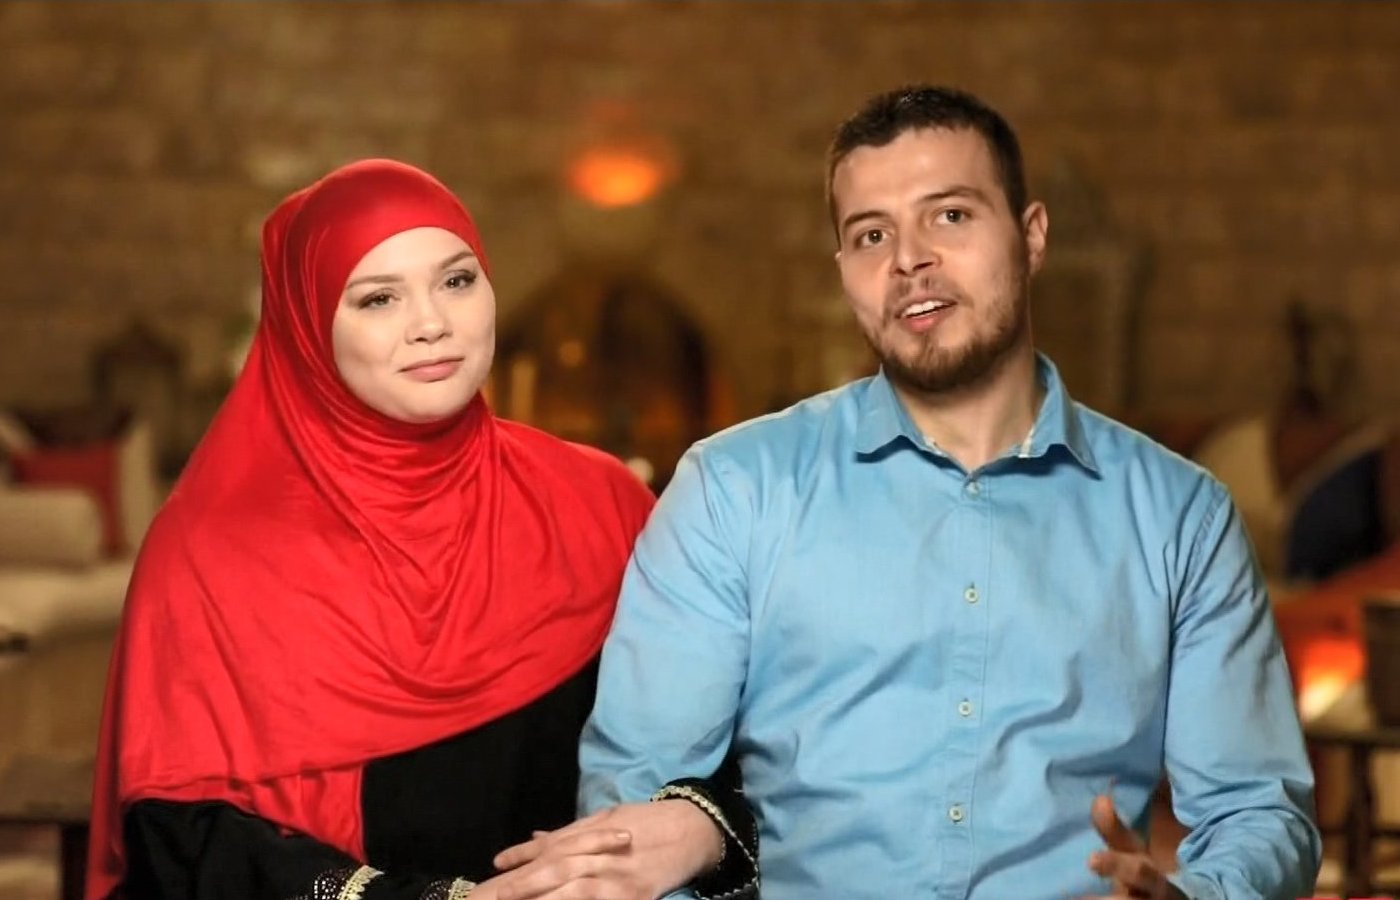 '90 Day Fiance Before the 90 Days' Couples Now Who's still together